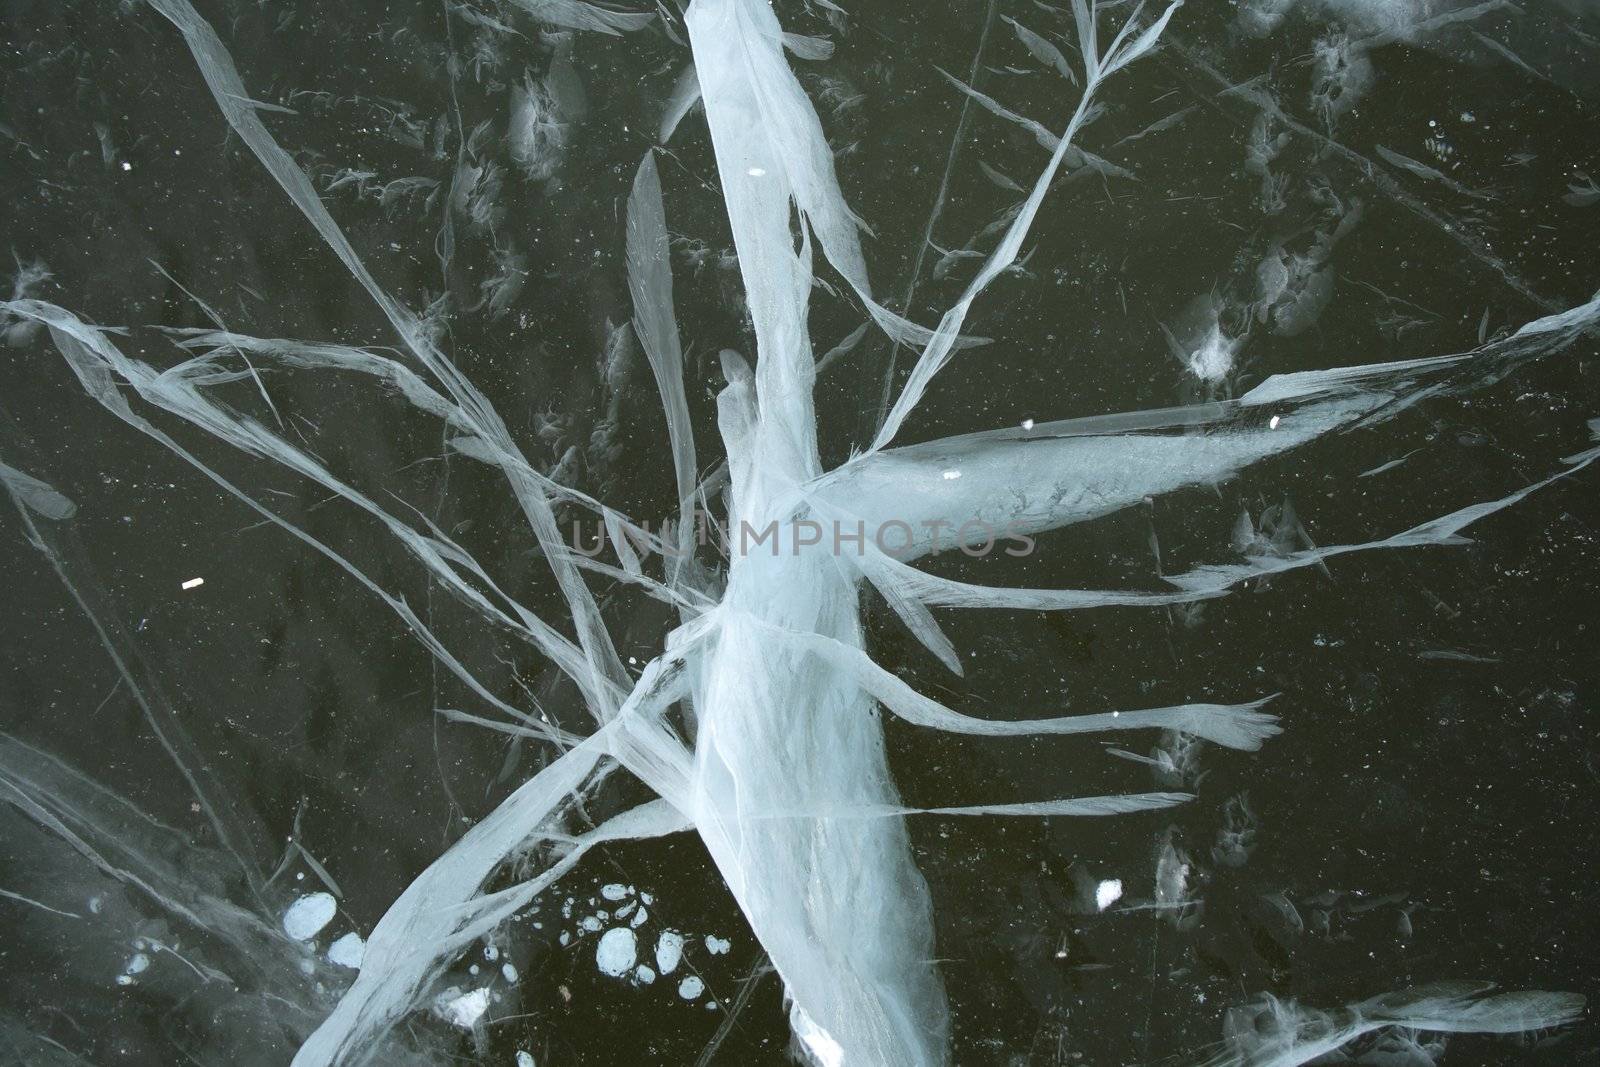 Frozen river: bizarre cracked ice, reminding an abstract white insect.